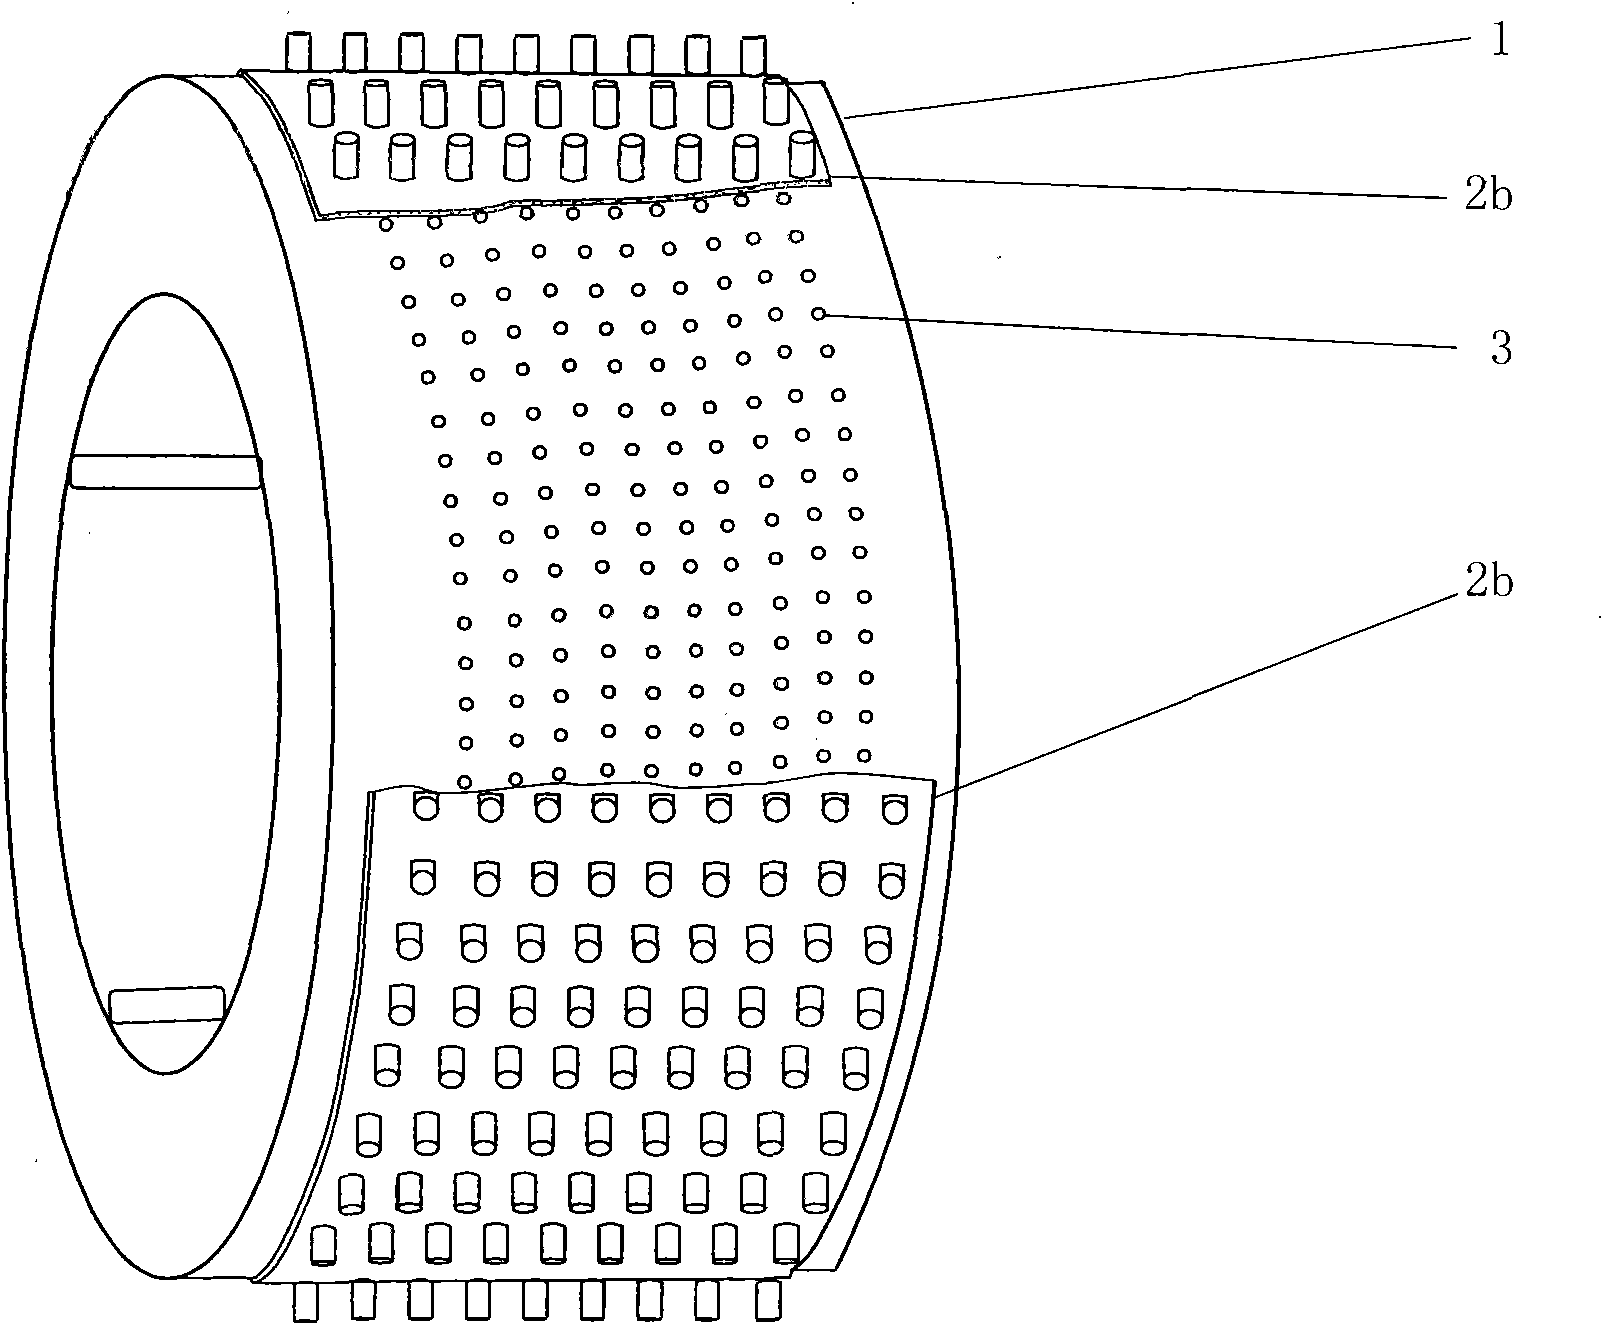 Single drum washing machine with dehydration holes capable of automatically opening and closing